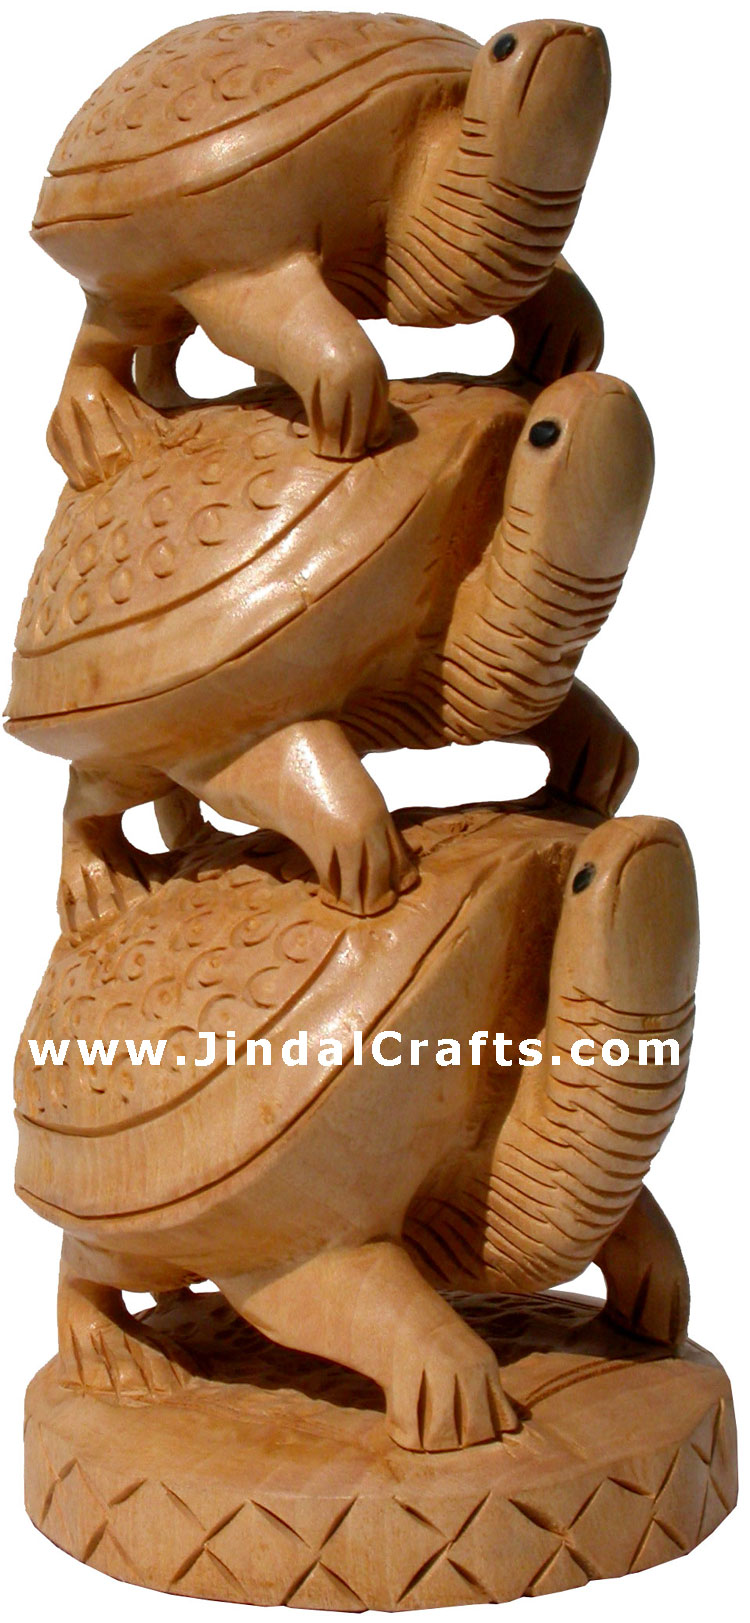 Wooden Turtle Tower - Handcarved Animal Figures Indian